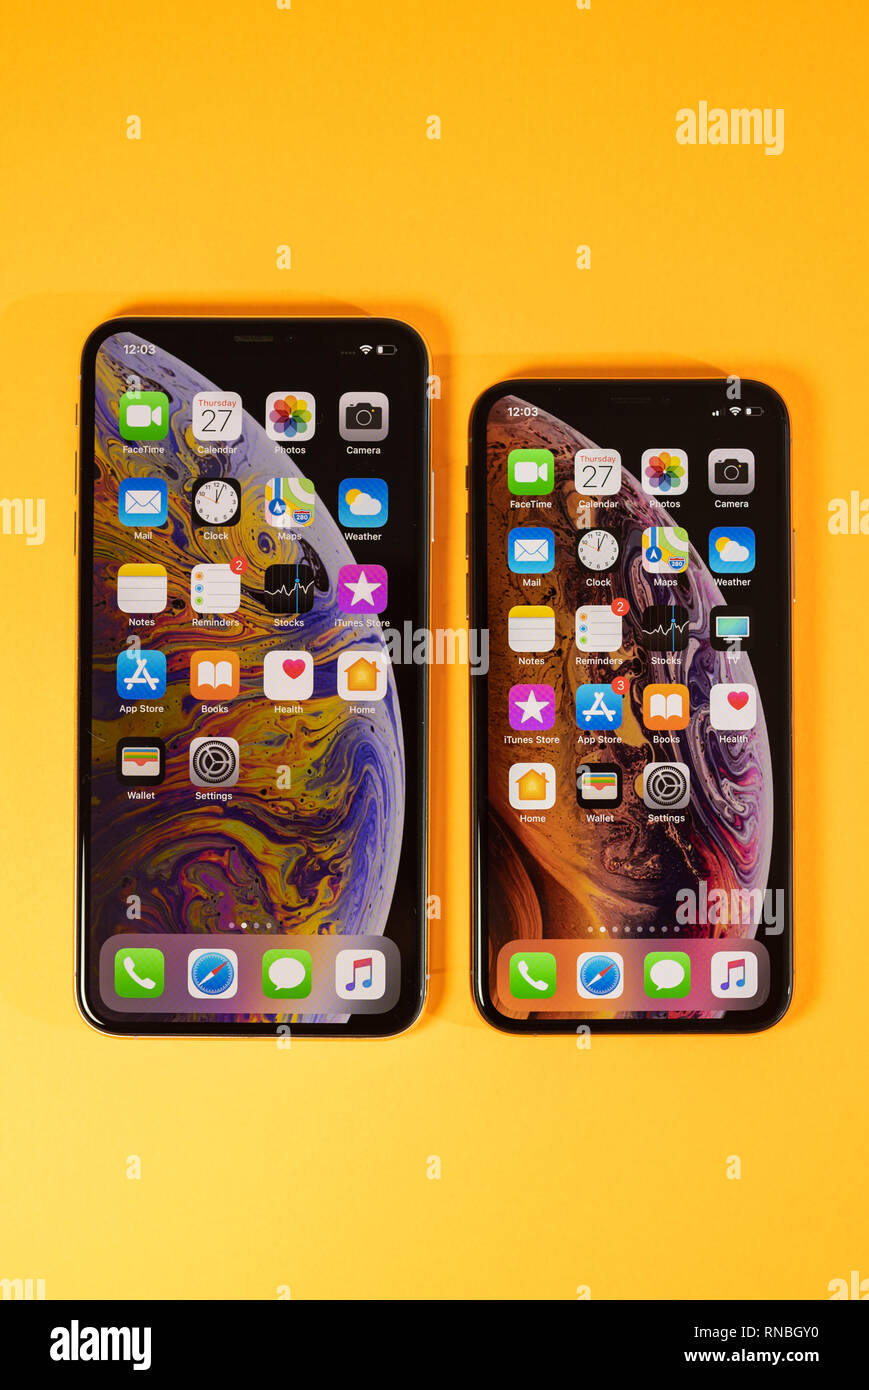 PARIS, FRANCE - SEP 27, 2018: Apple Computers iOS 12 home screen on iPhone  Xs and Xs